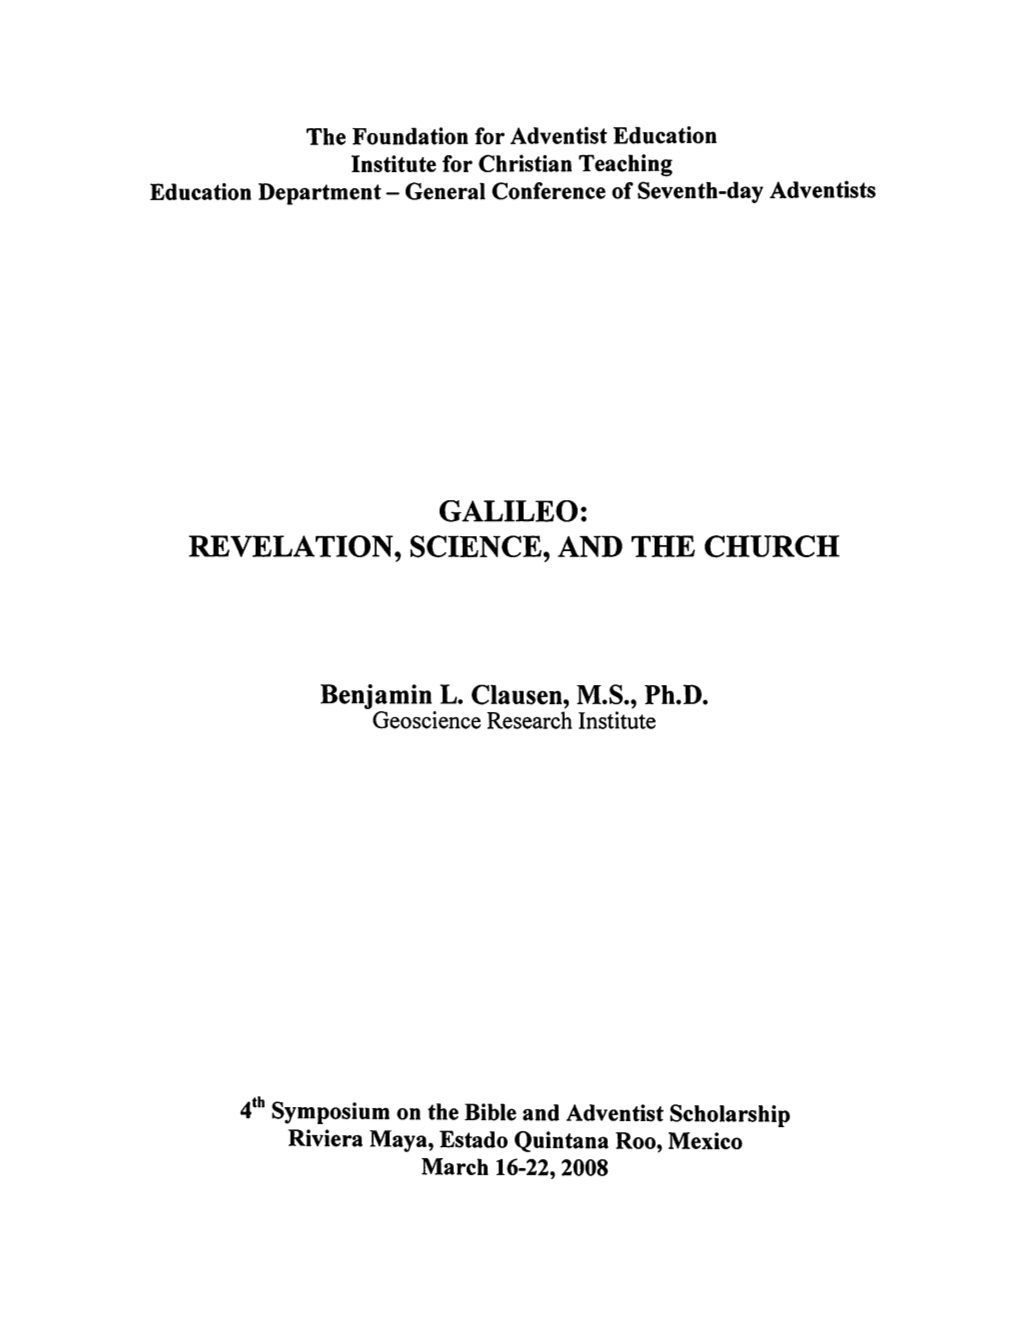 Galileo: Revelation, Science, and the Church